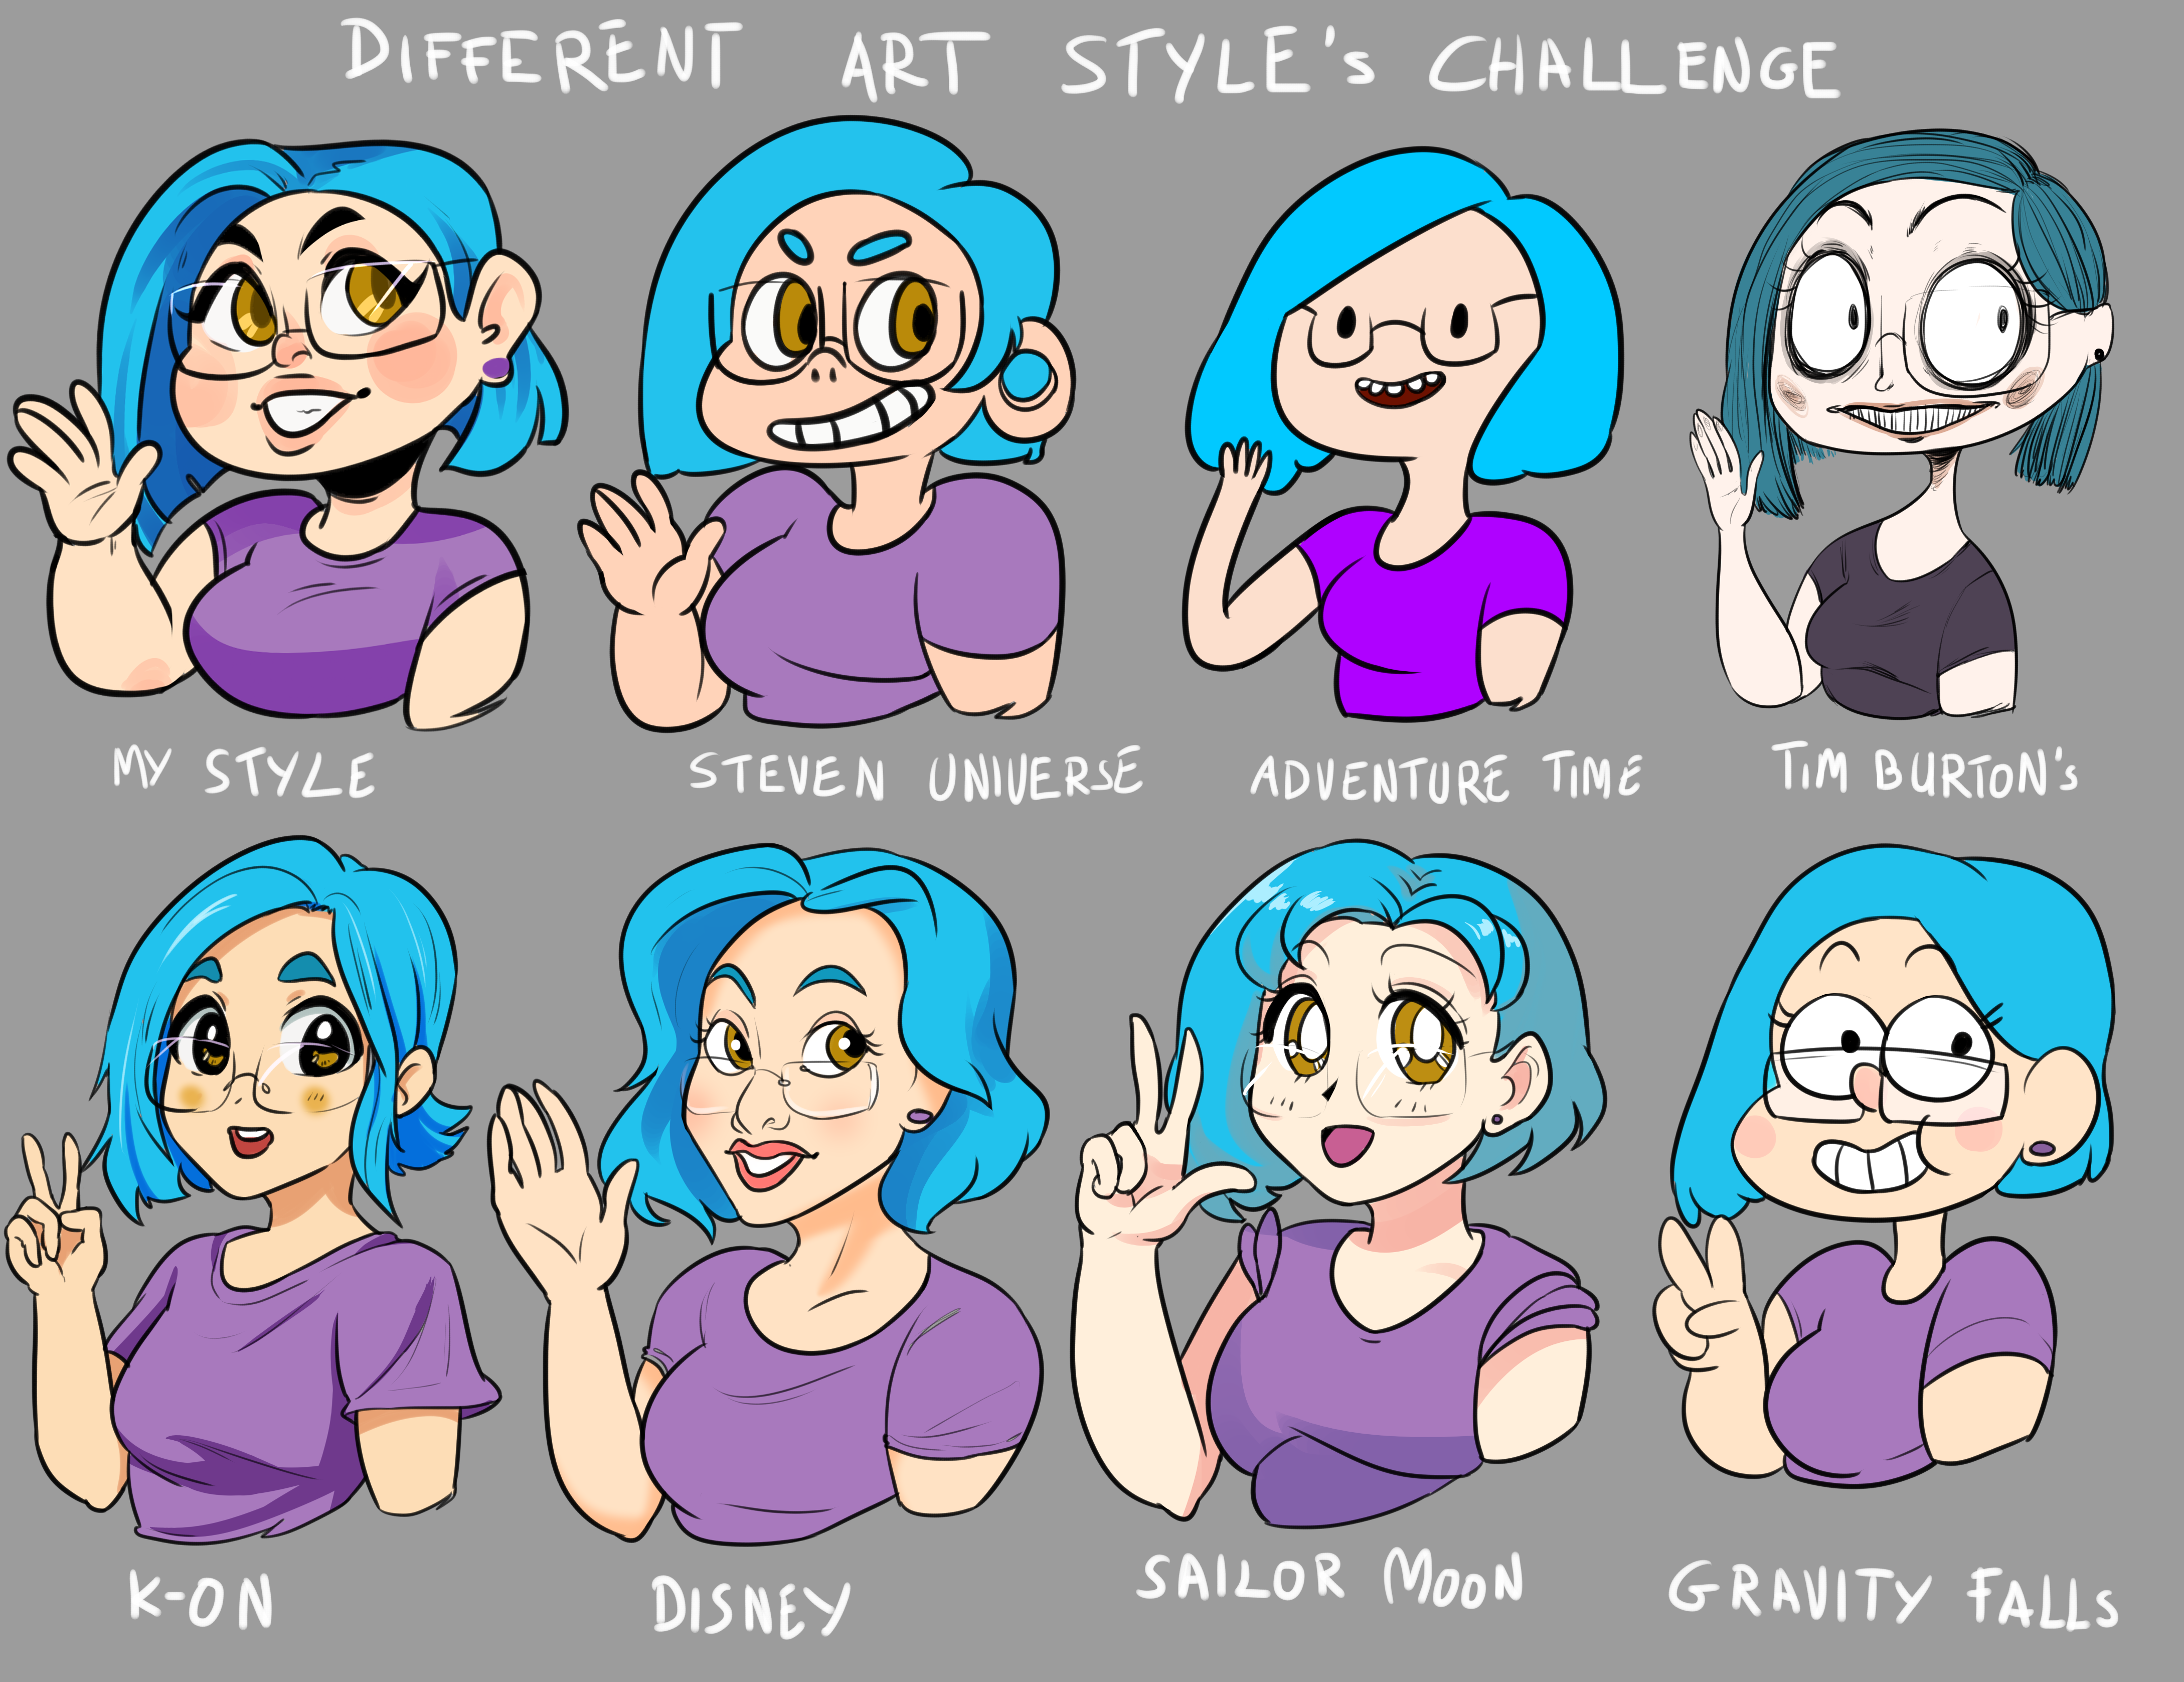 different_art_style_s_challenge_by_corelle_vairel-dac3nuj.png (4355×